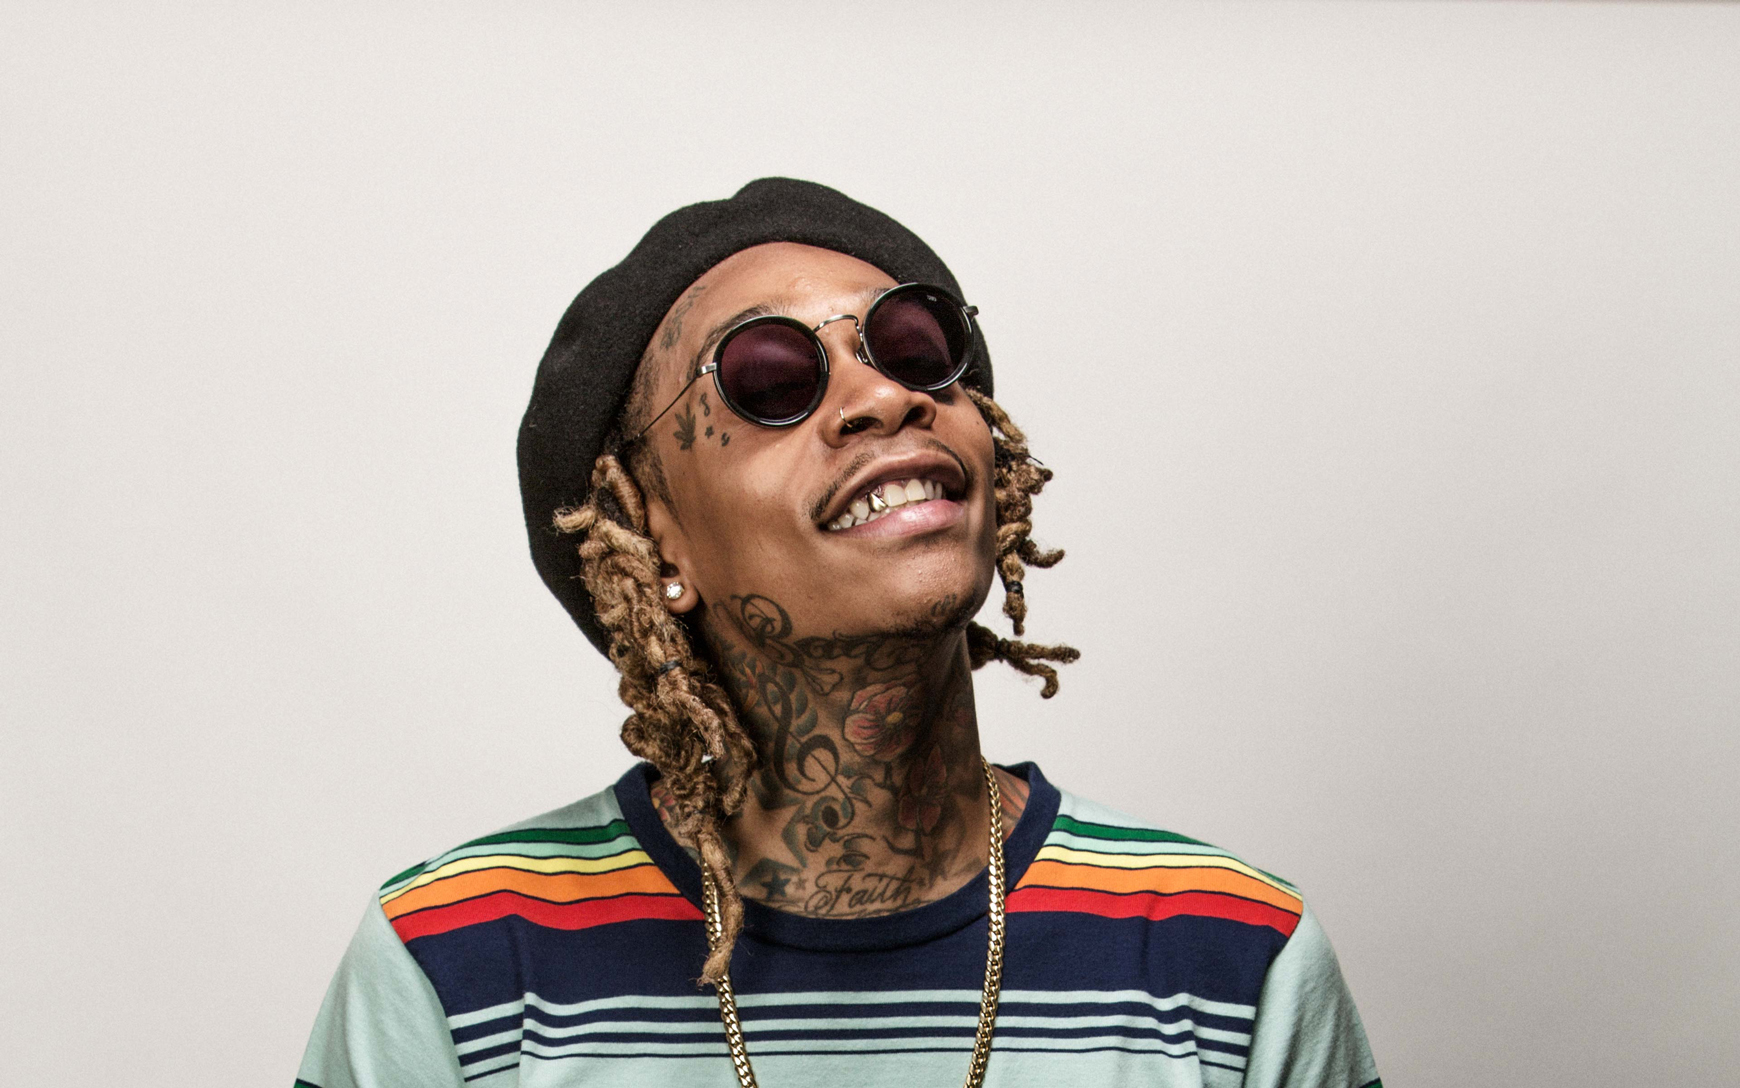 Spotify enlists Wiz Khalifa for relaunched Kids category